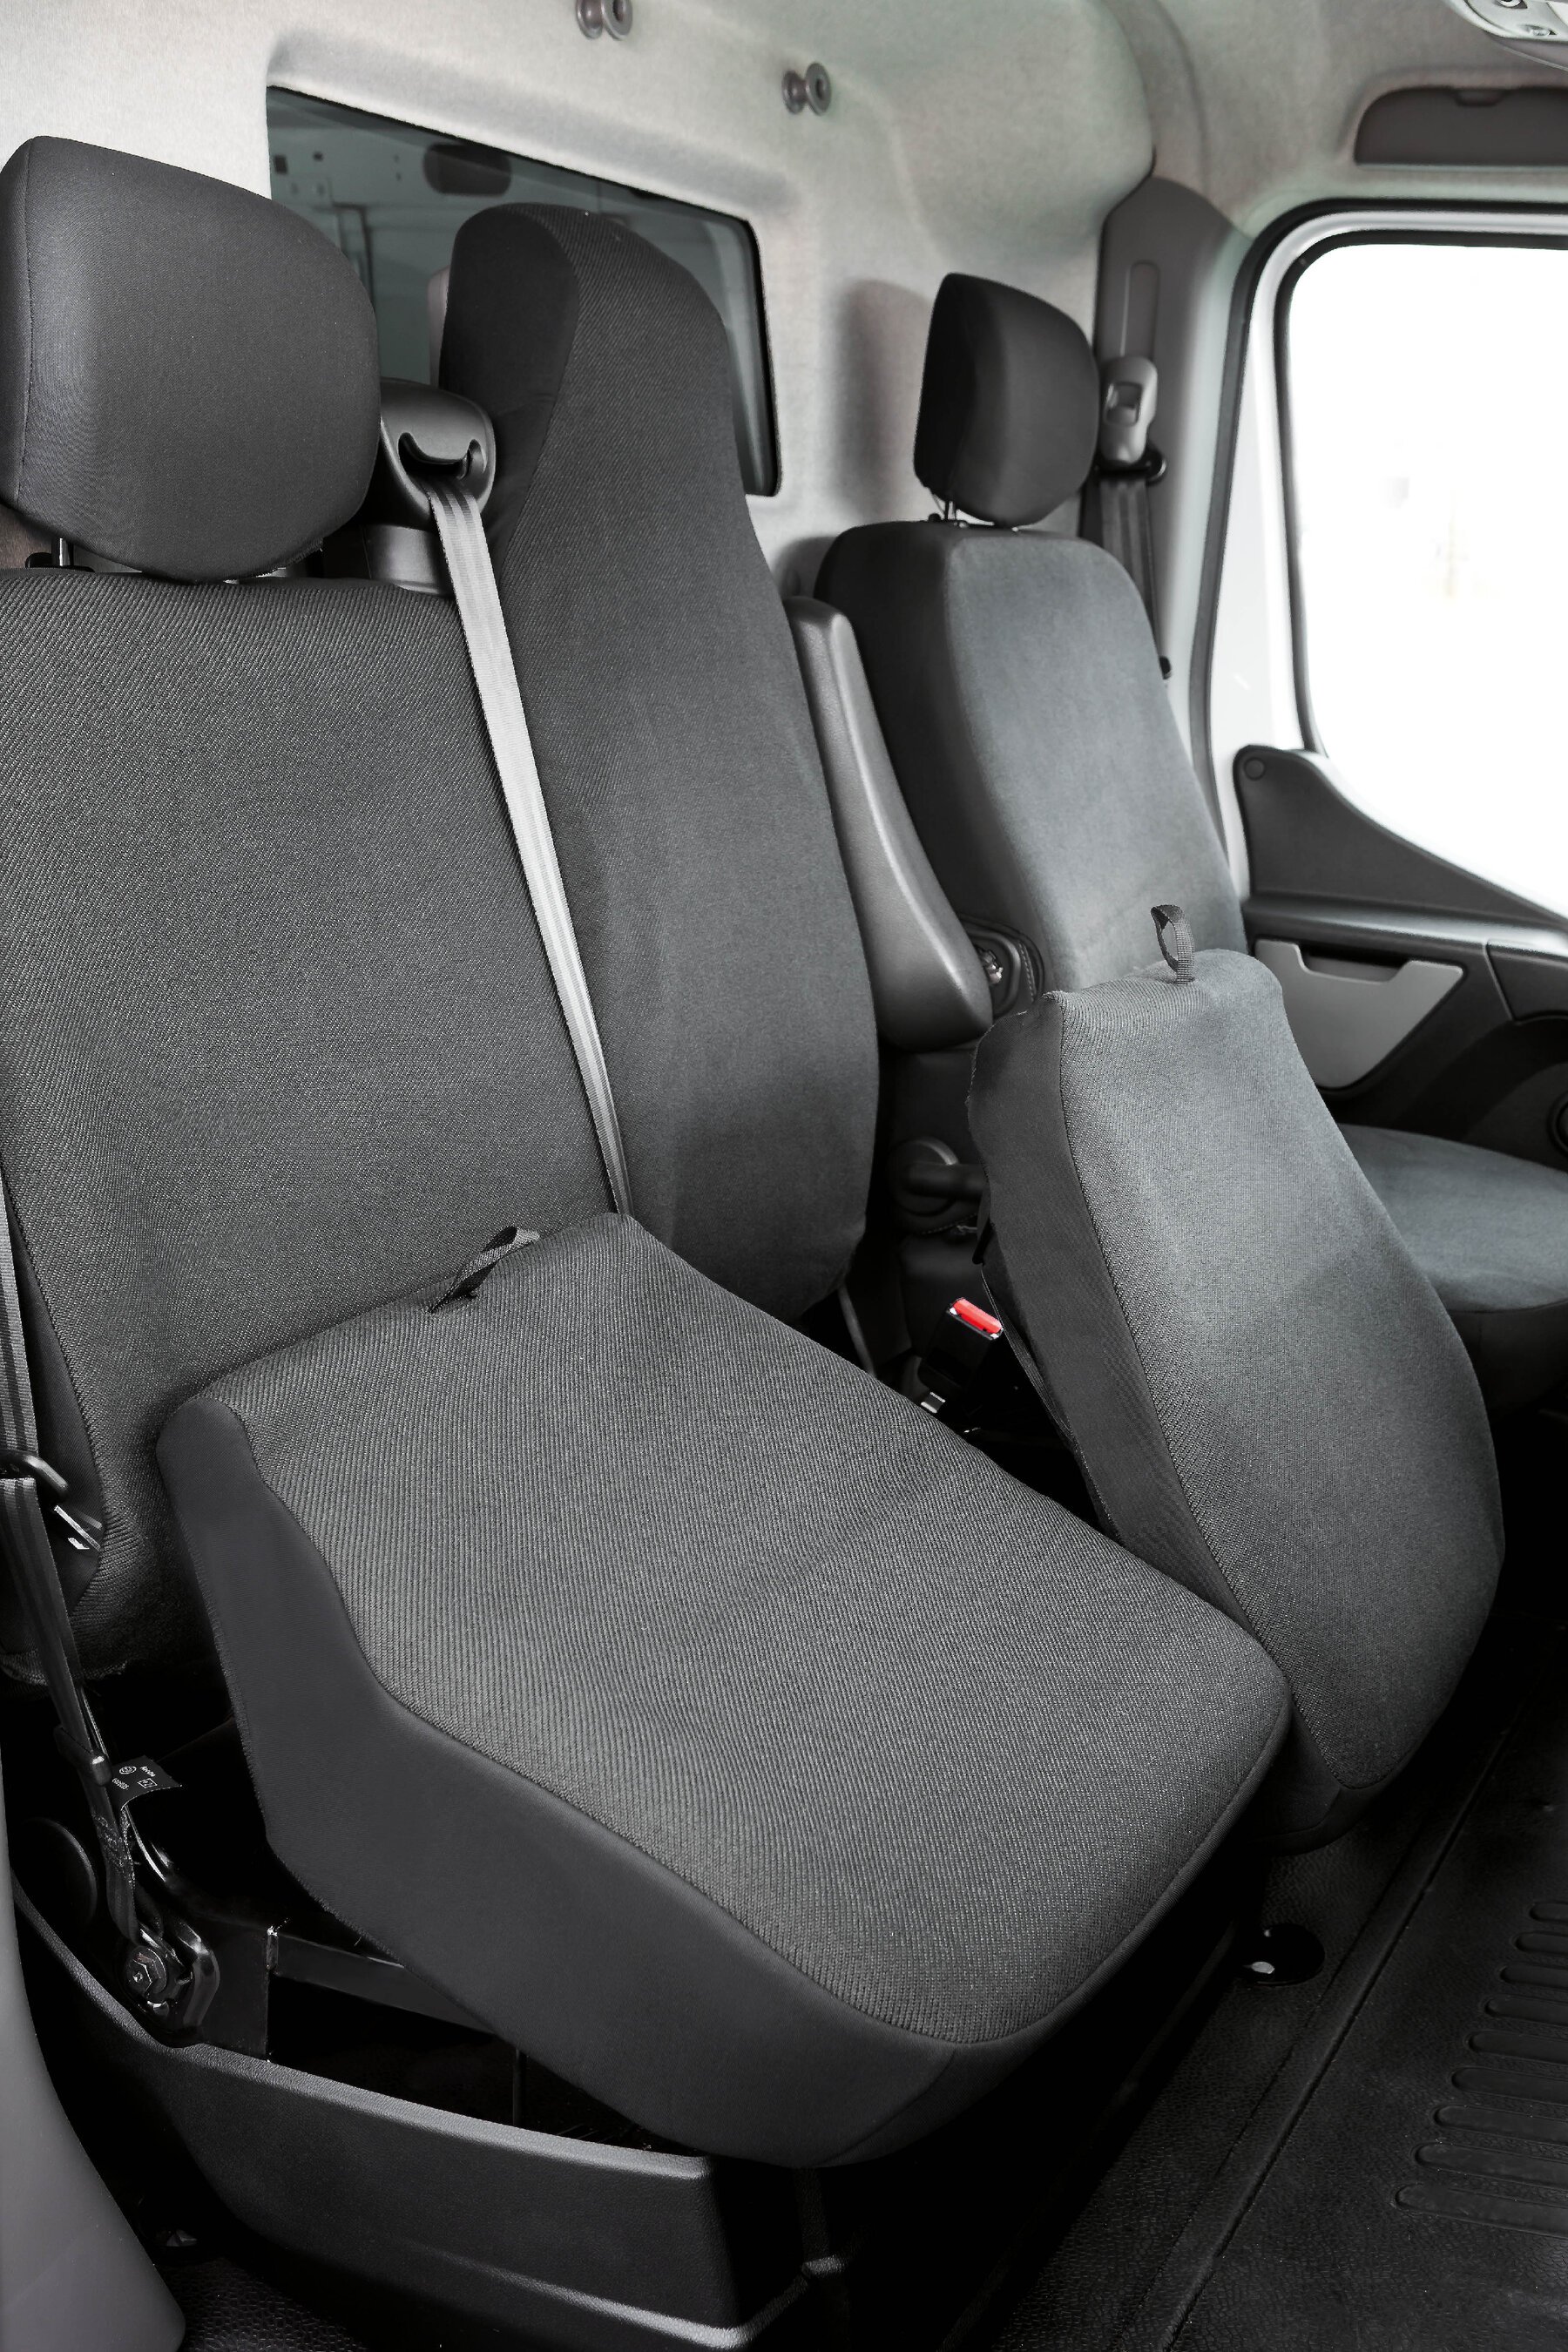 Seat cover made of fabric for Opel Movano, Renault Master, Nissan Interstar, single seat cover, double seat cover